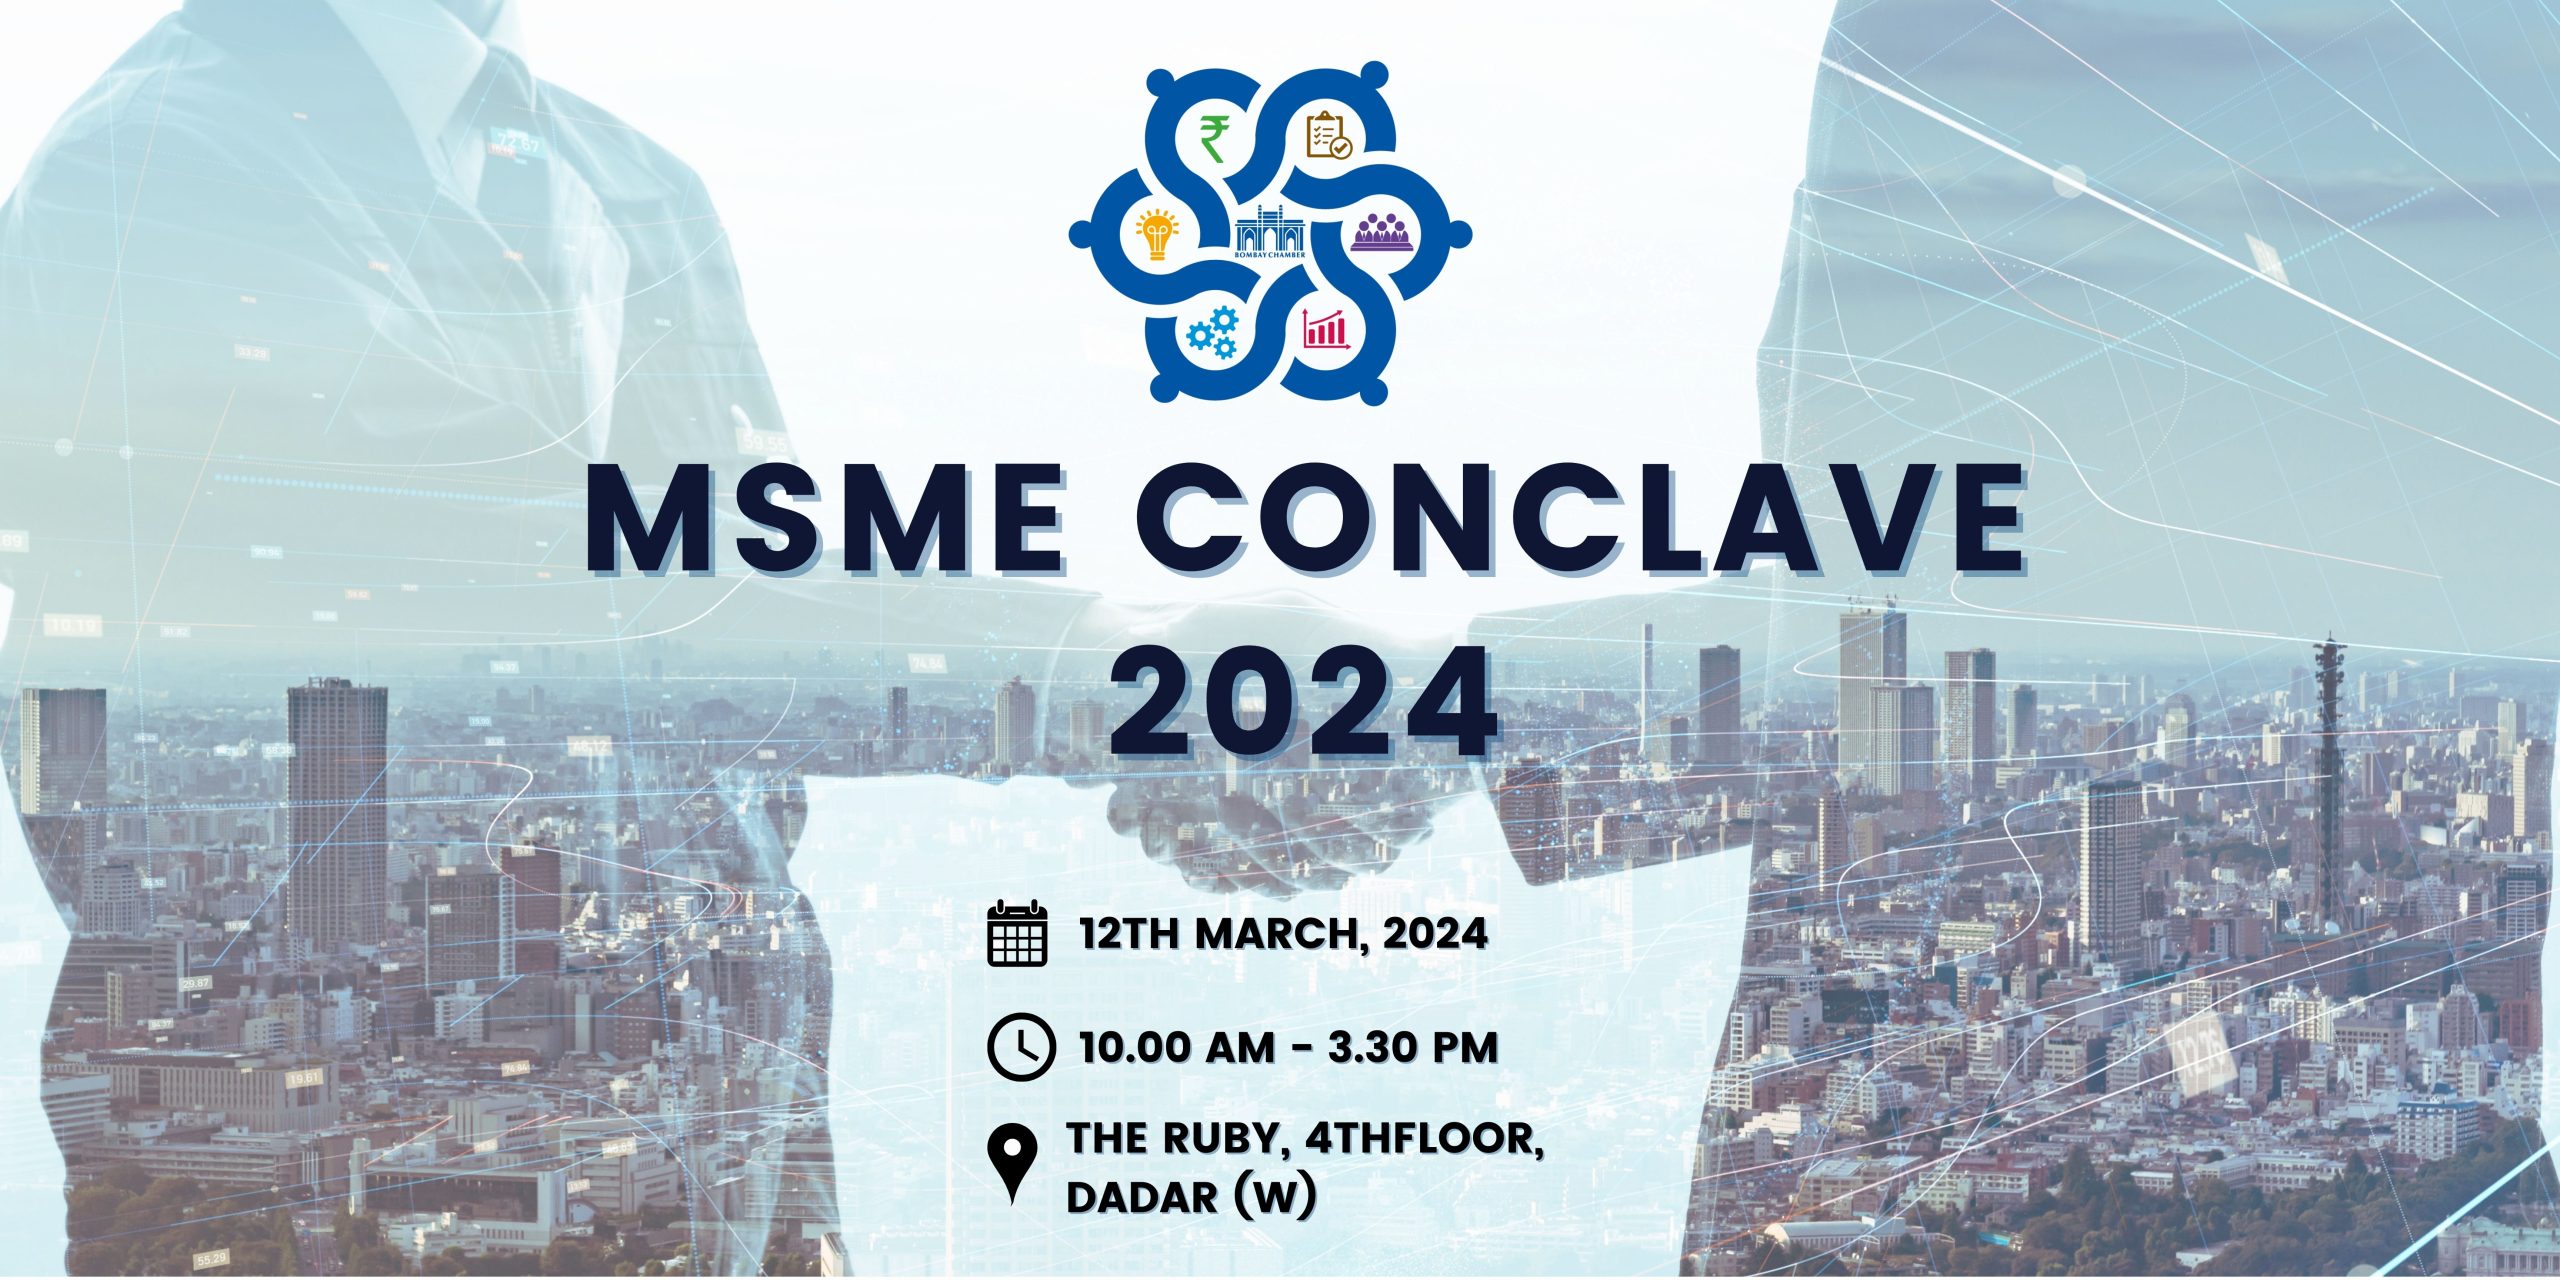 MSME CONCLAVE 2024: EMPOWERING MSMEs